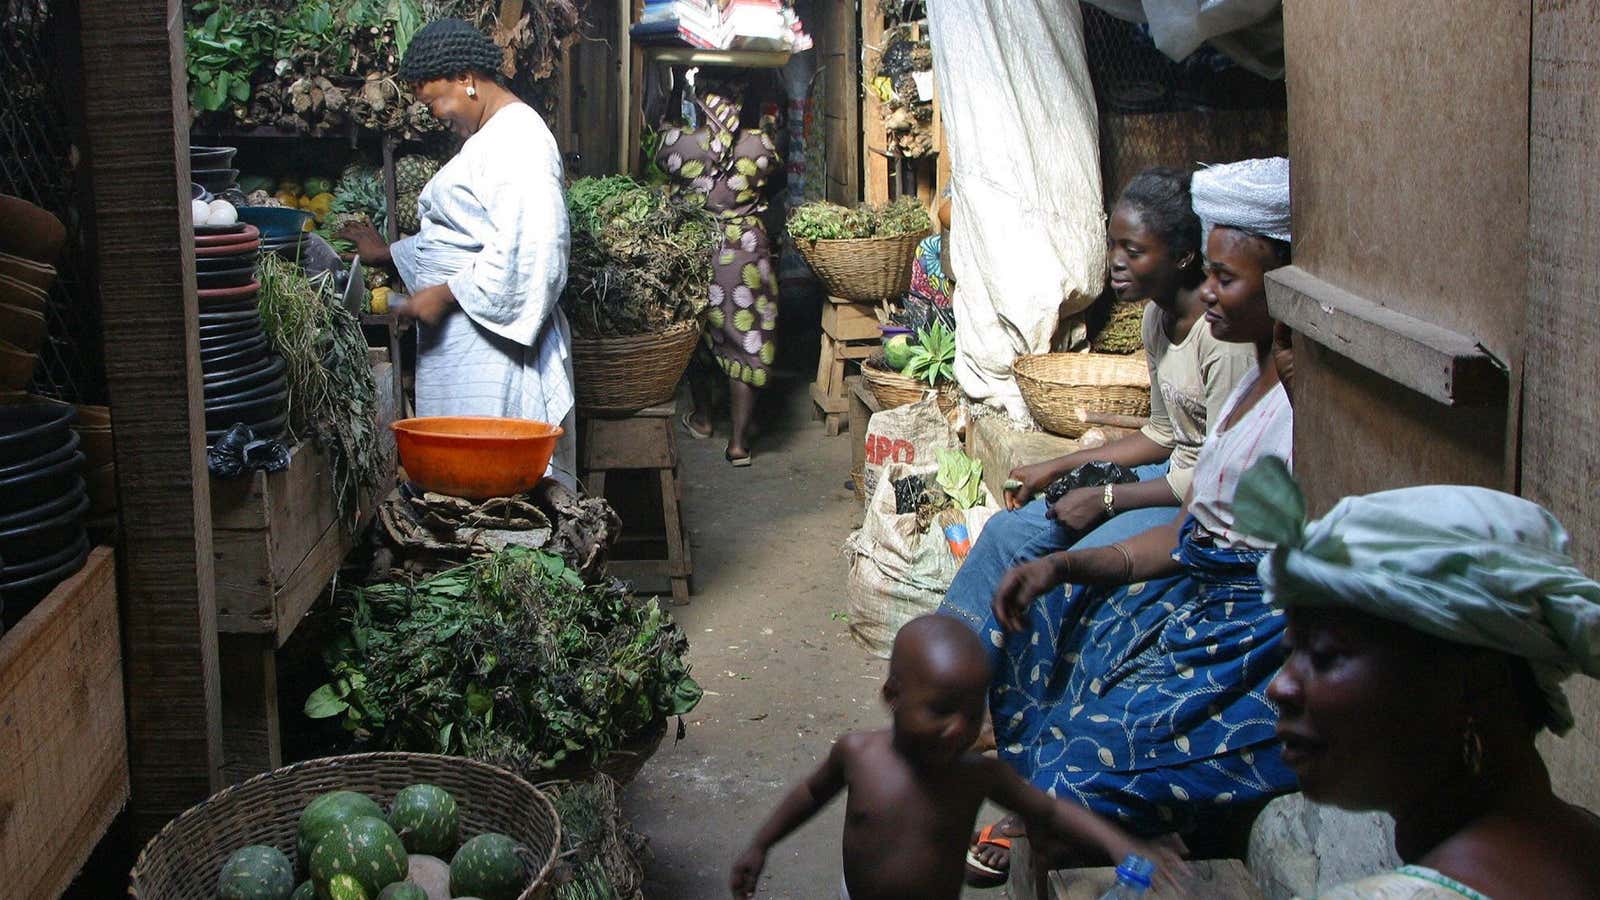 Women selling traditional medicines  look at piles of leaves, vines  and other herbs for sale at Jankara herbal market in Lagos, Nigeria,